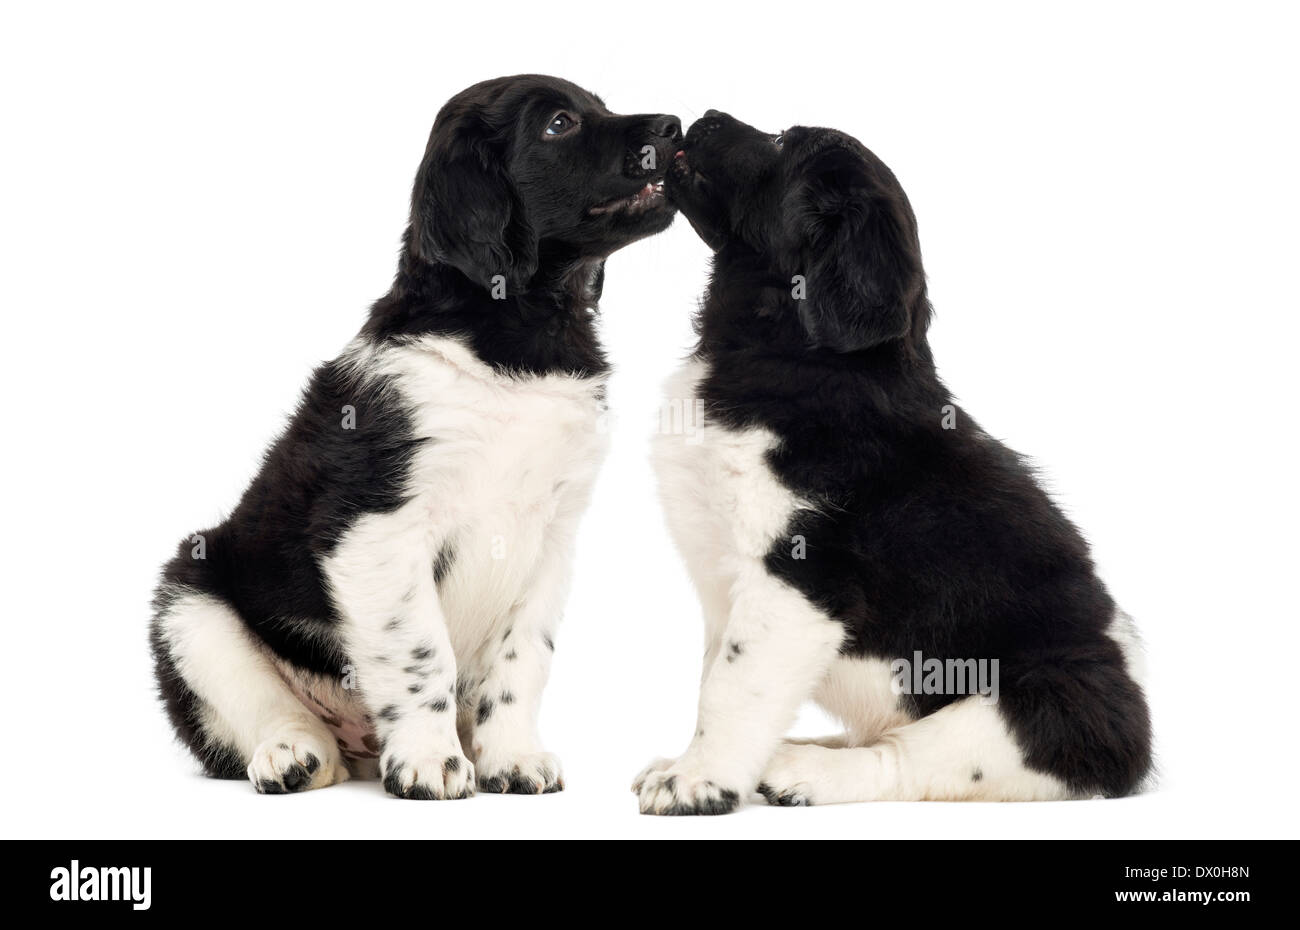 Two Stabyhoun puppies together against white background Stock Photo